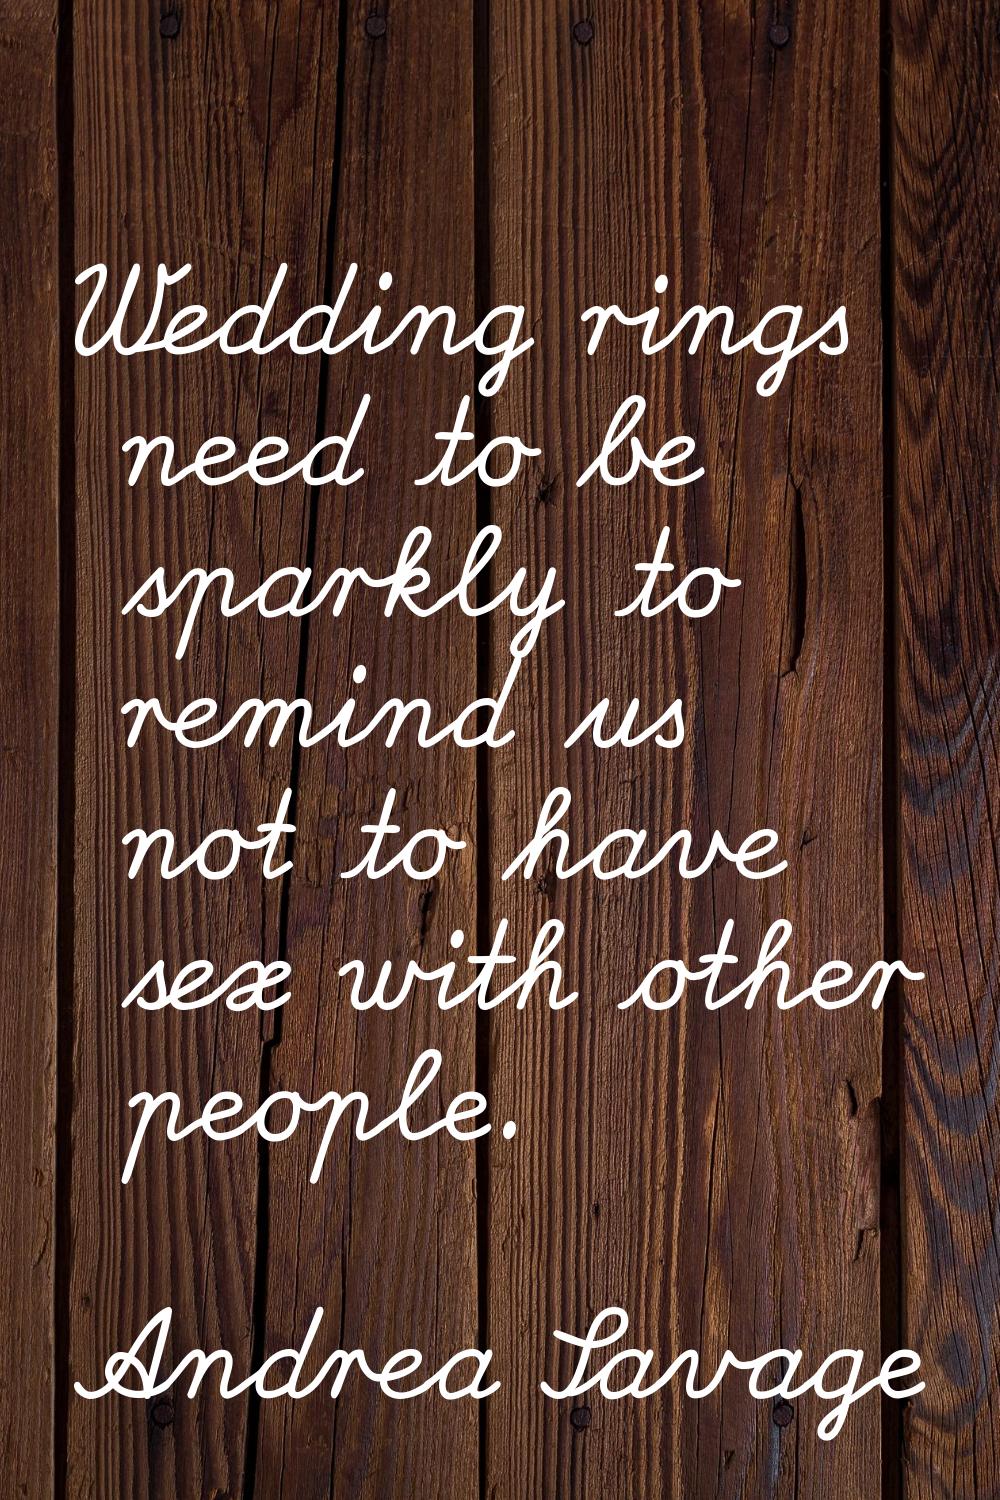 Wedding rings need to be sparkly to remind us not to have sex with other people.